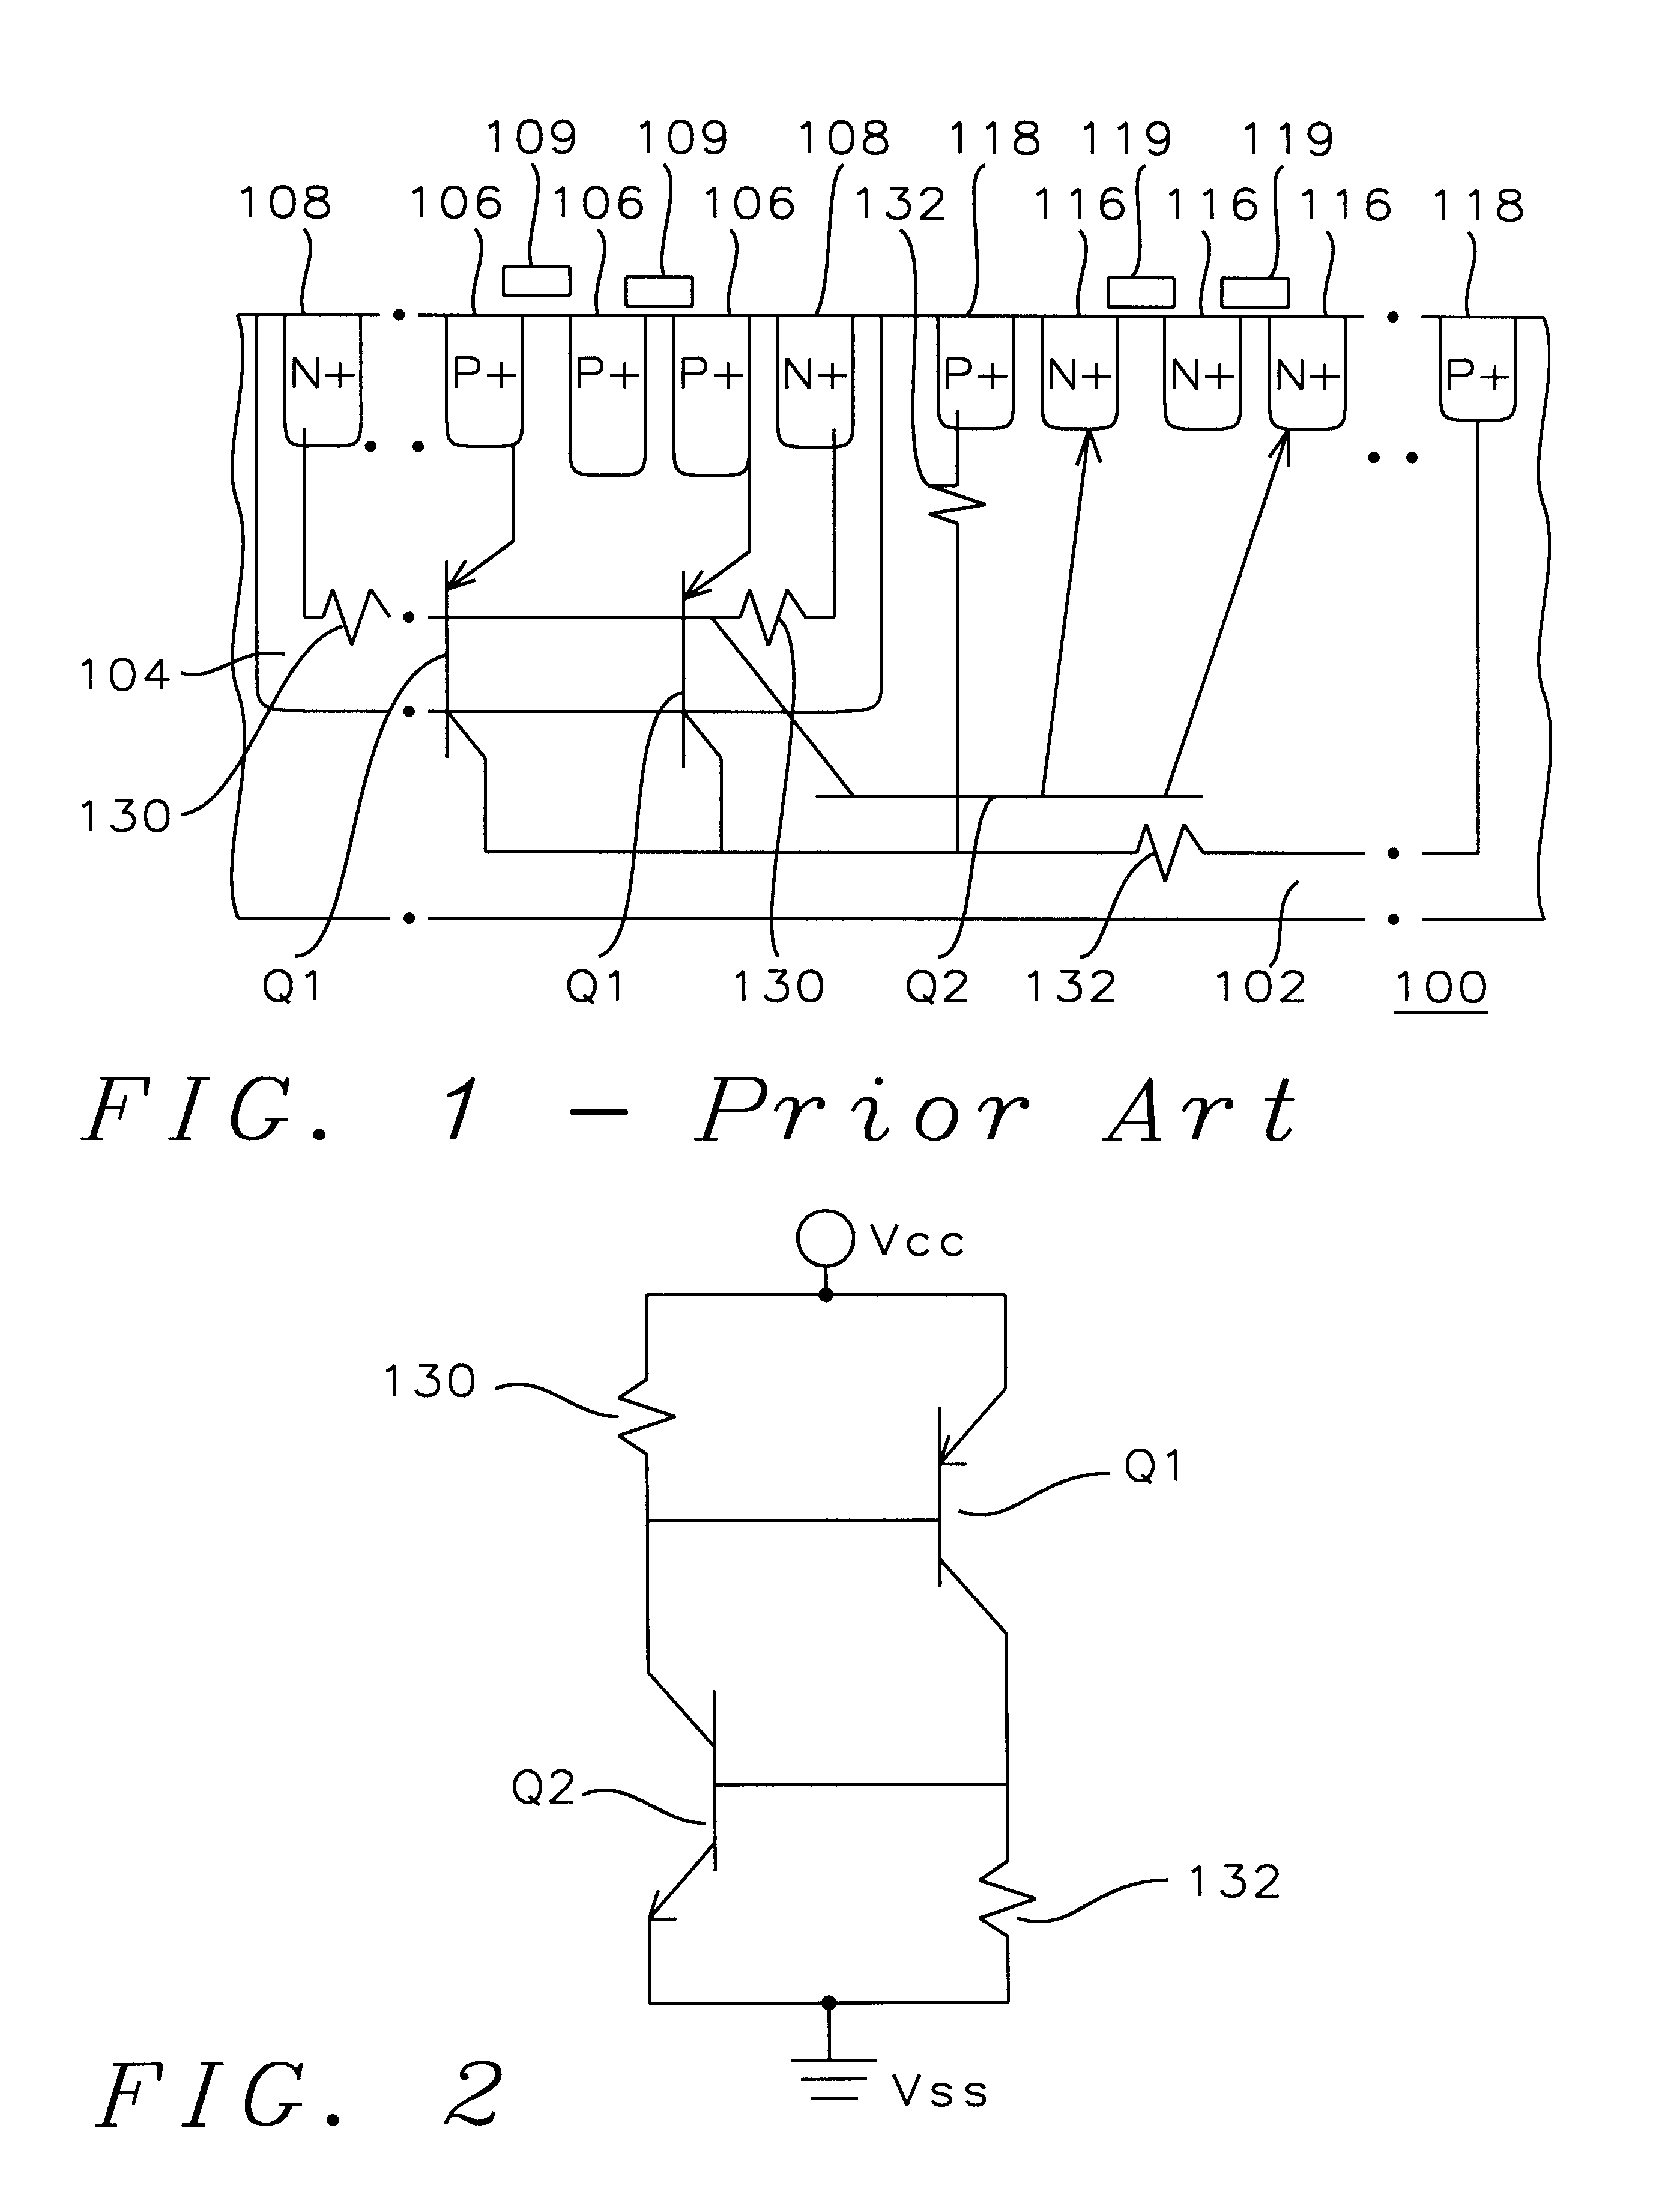 Highly latchup-immune CMOS I/O structures